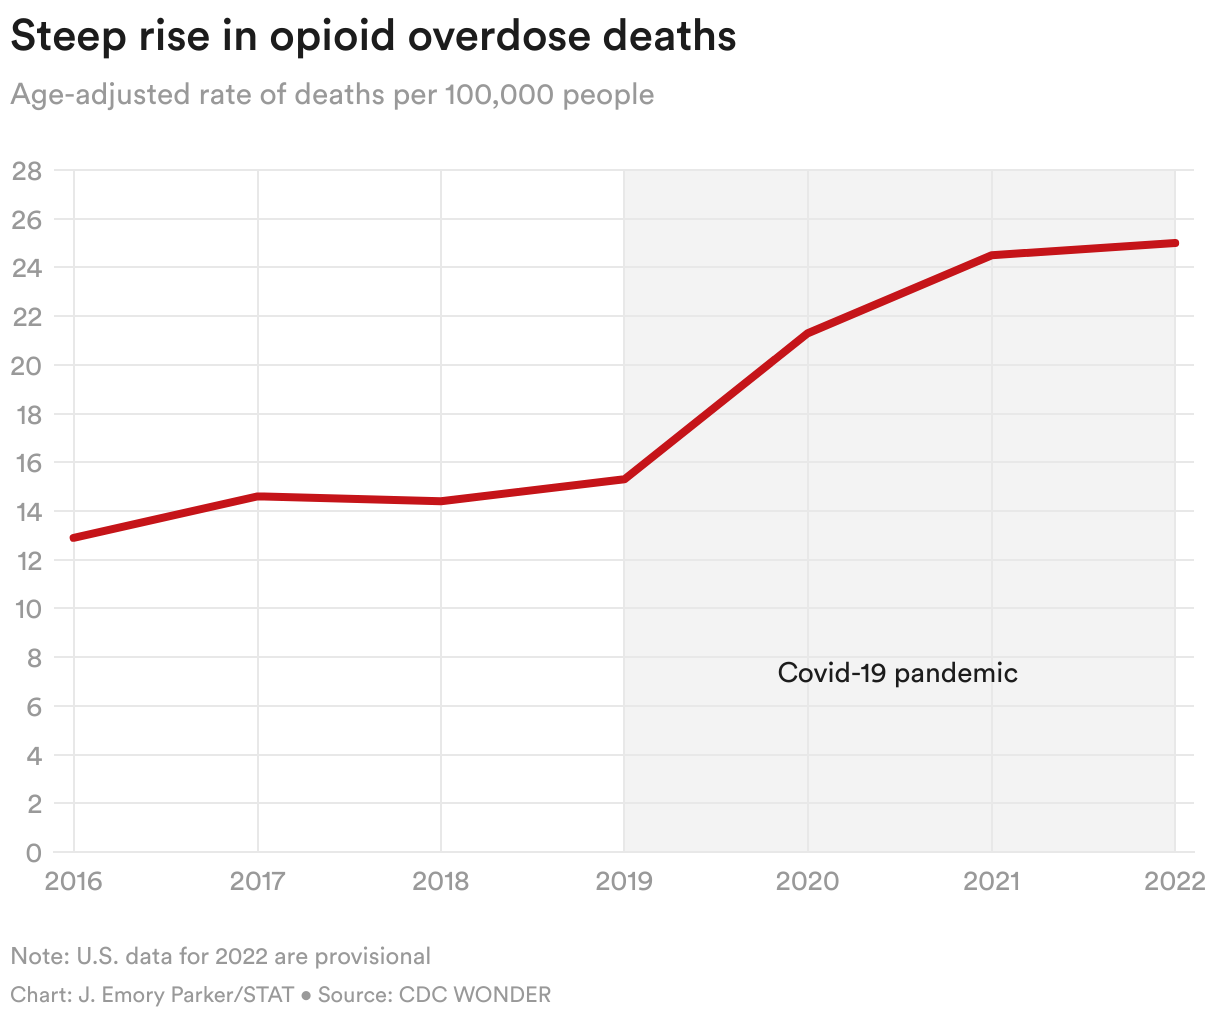 A line chart showing the change in the rate of opioid deaths from 2016 to 2022. The line increases slightly from about 13 to 15 from 2016 to 2019. After 2019, during the Covid-19 pandemic, the line increases rapidly from about 15 to about 25 as of 2022.